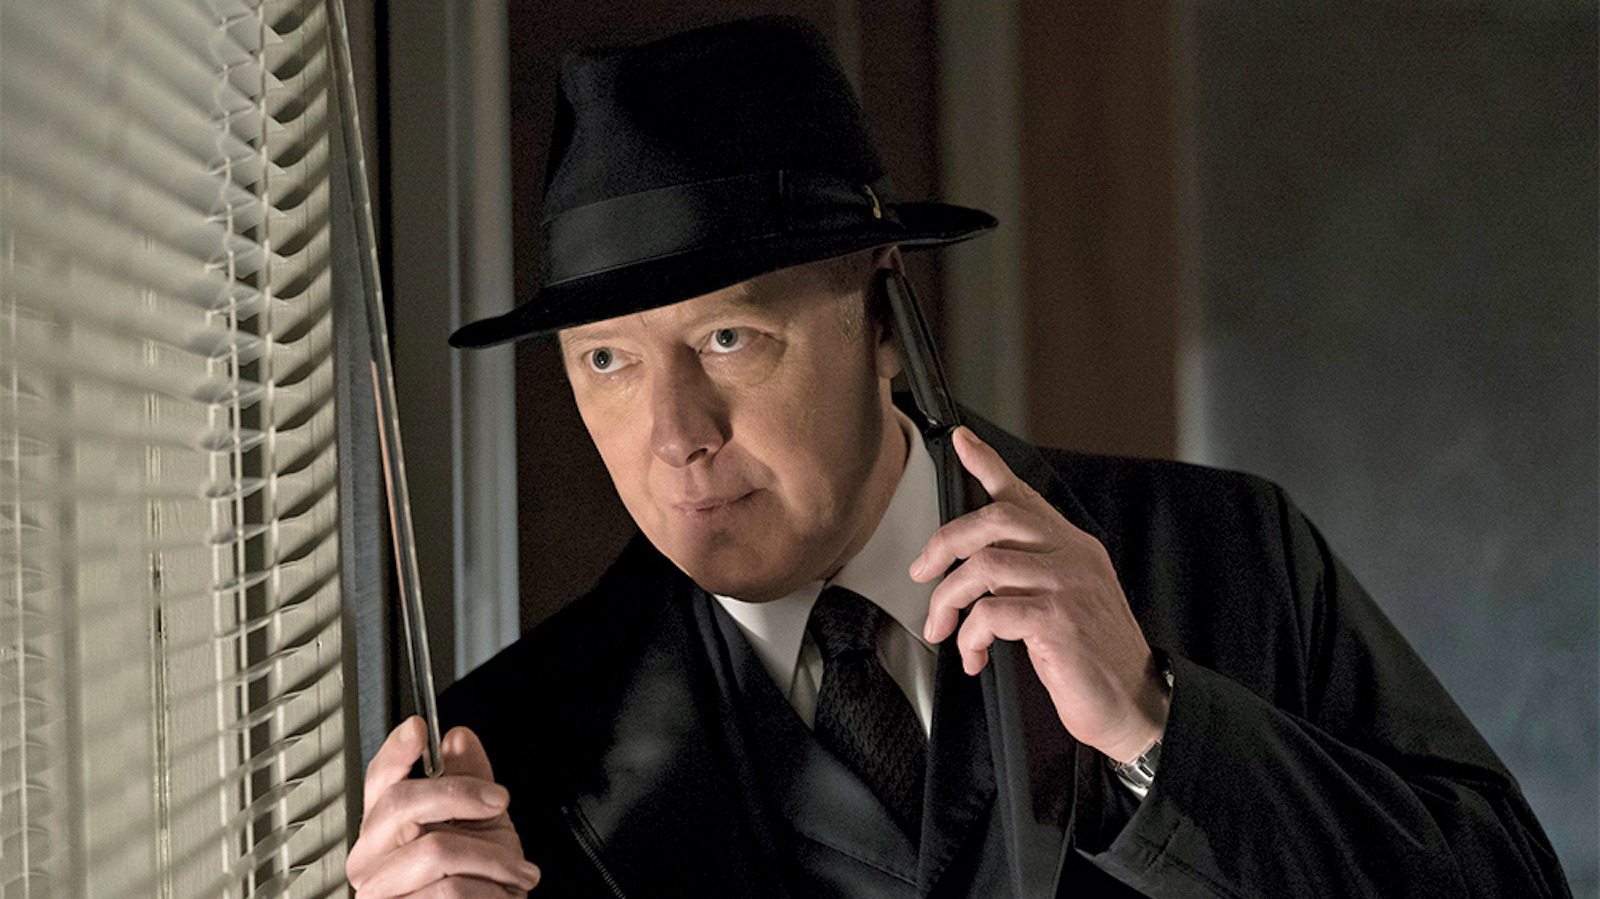 The Blacklist Season 9: Release Date, Cast, And More